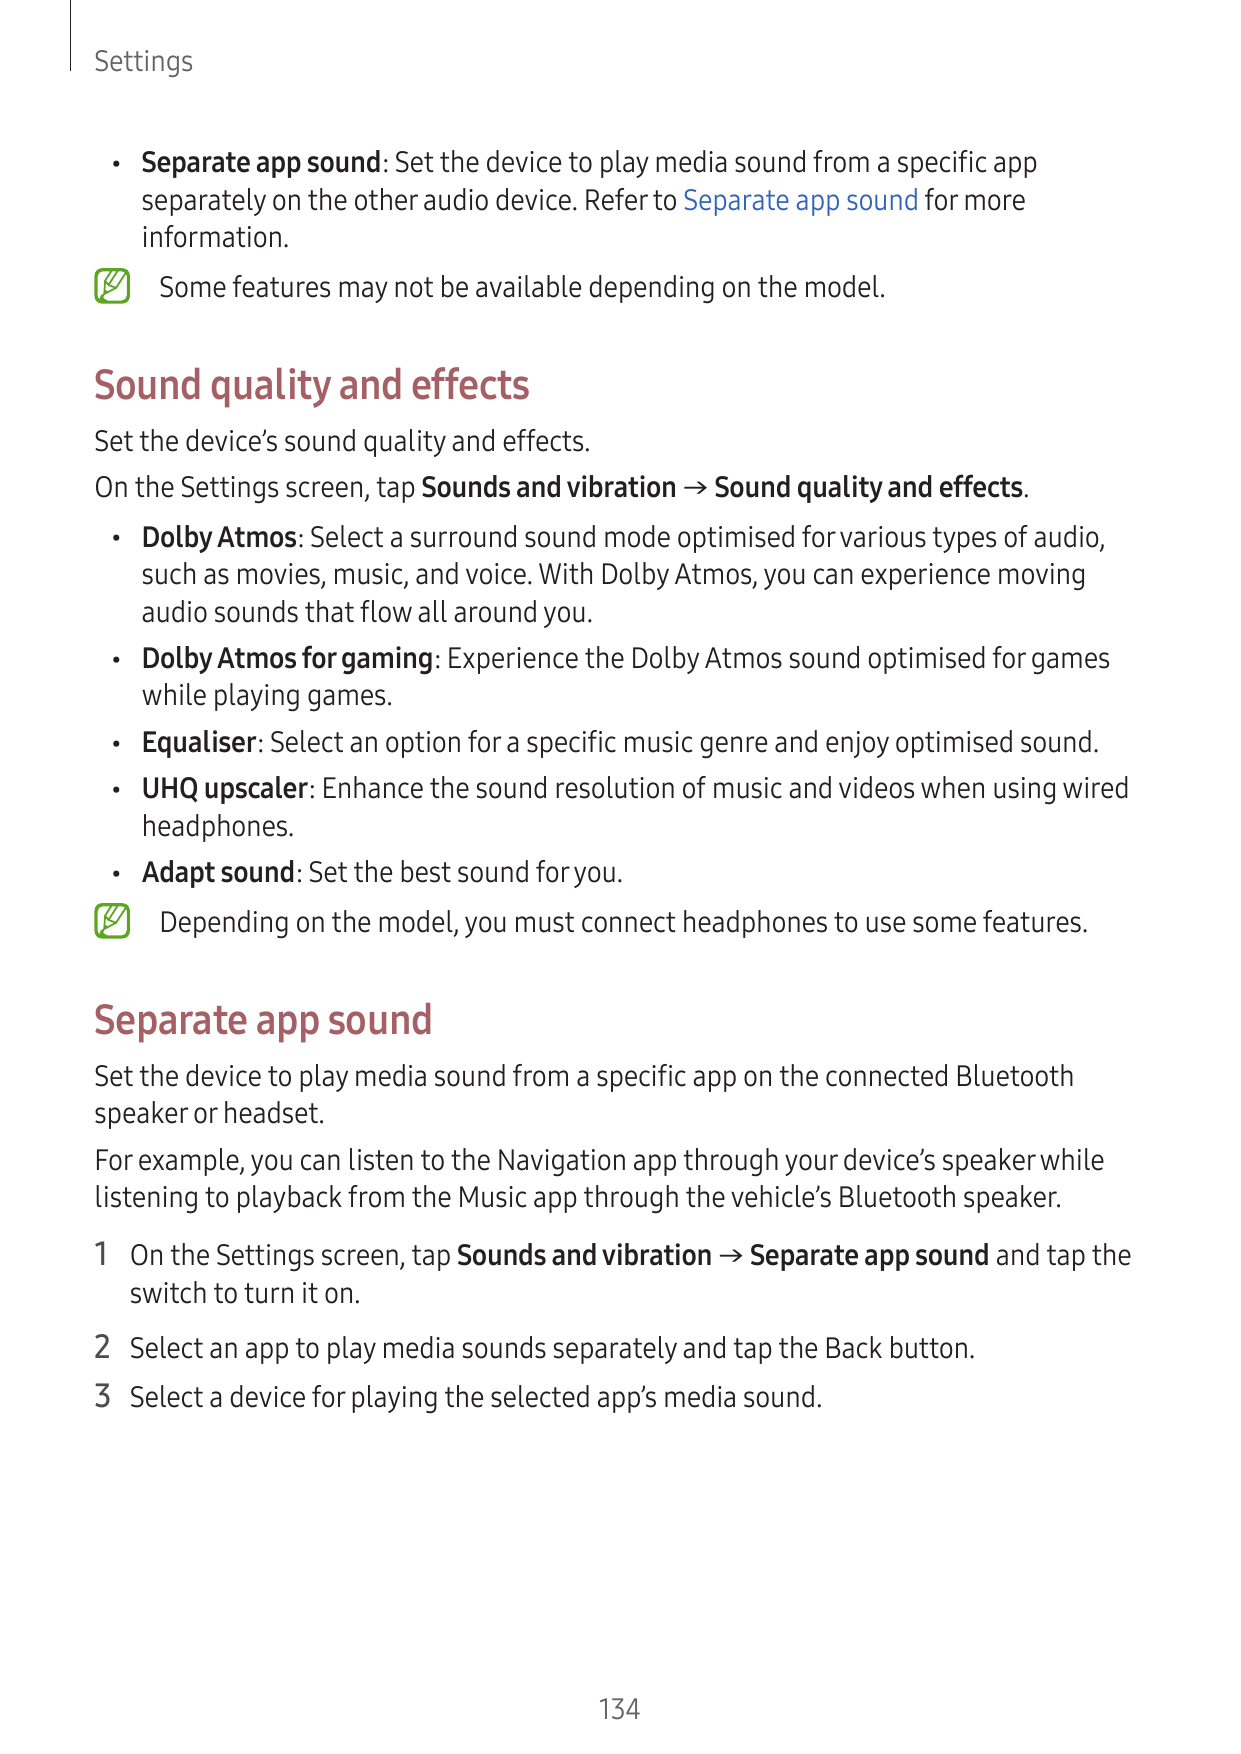 Settings•Separate app sound: Set the device to play media sound from a specific appseparately on the other audio device. Refer t